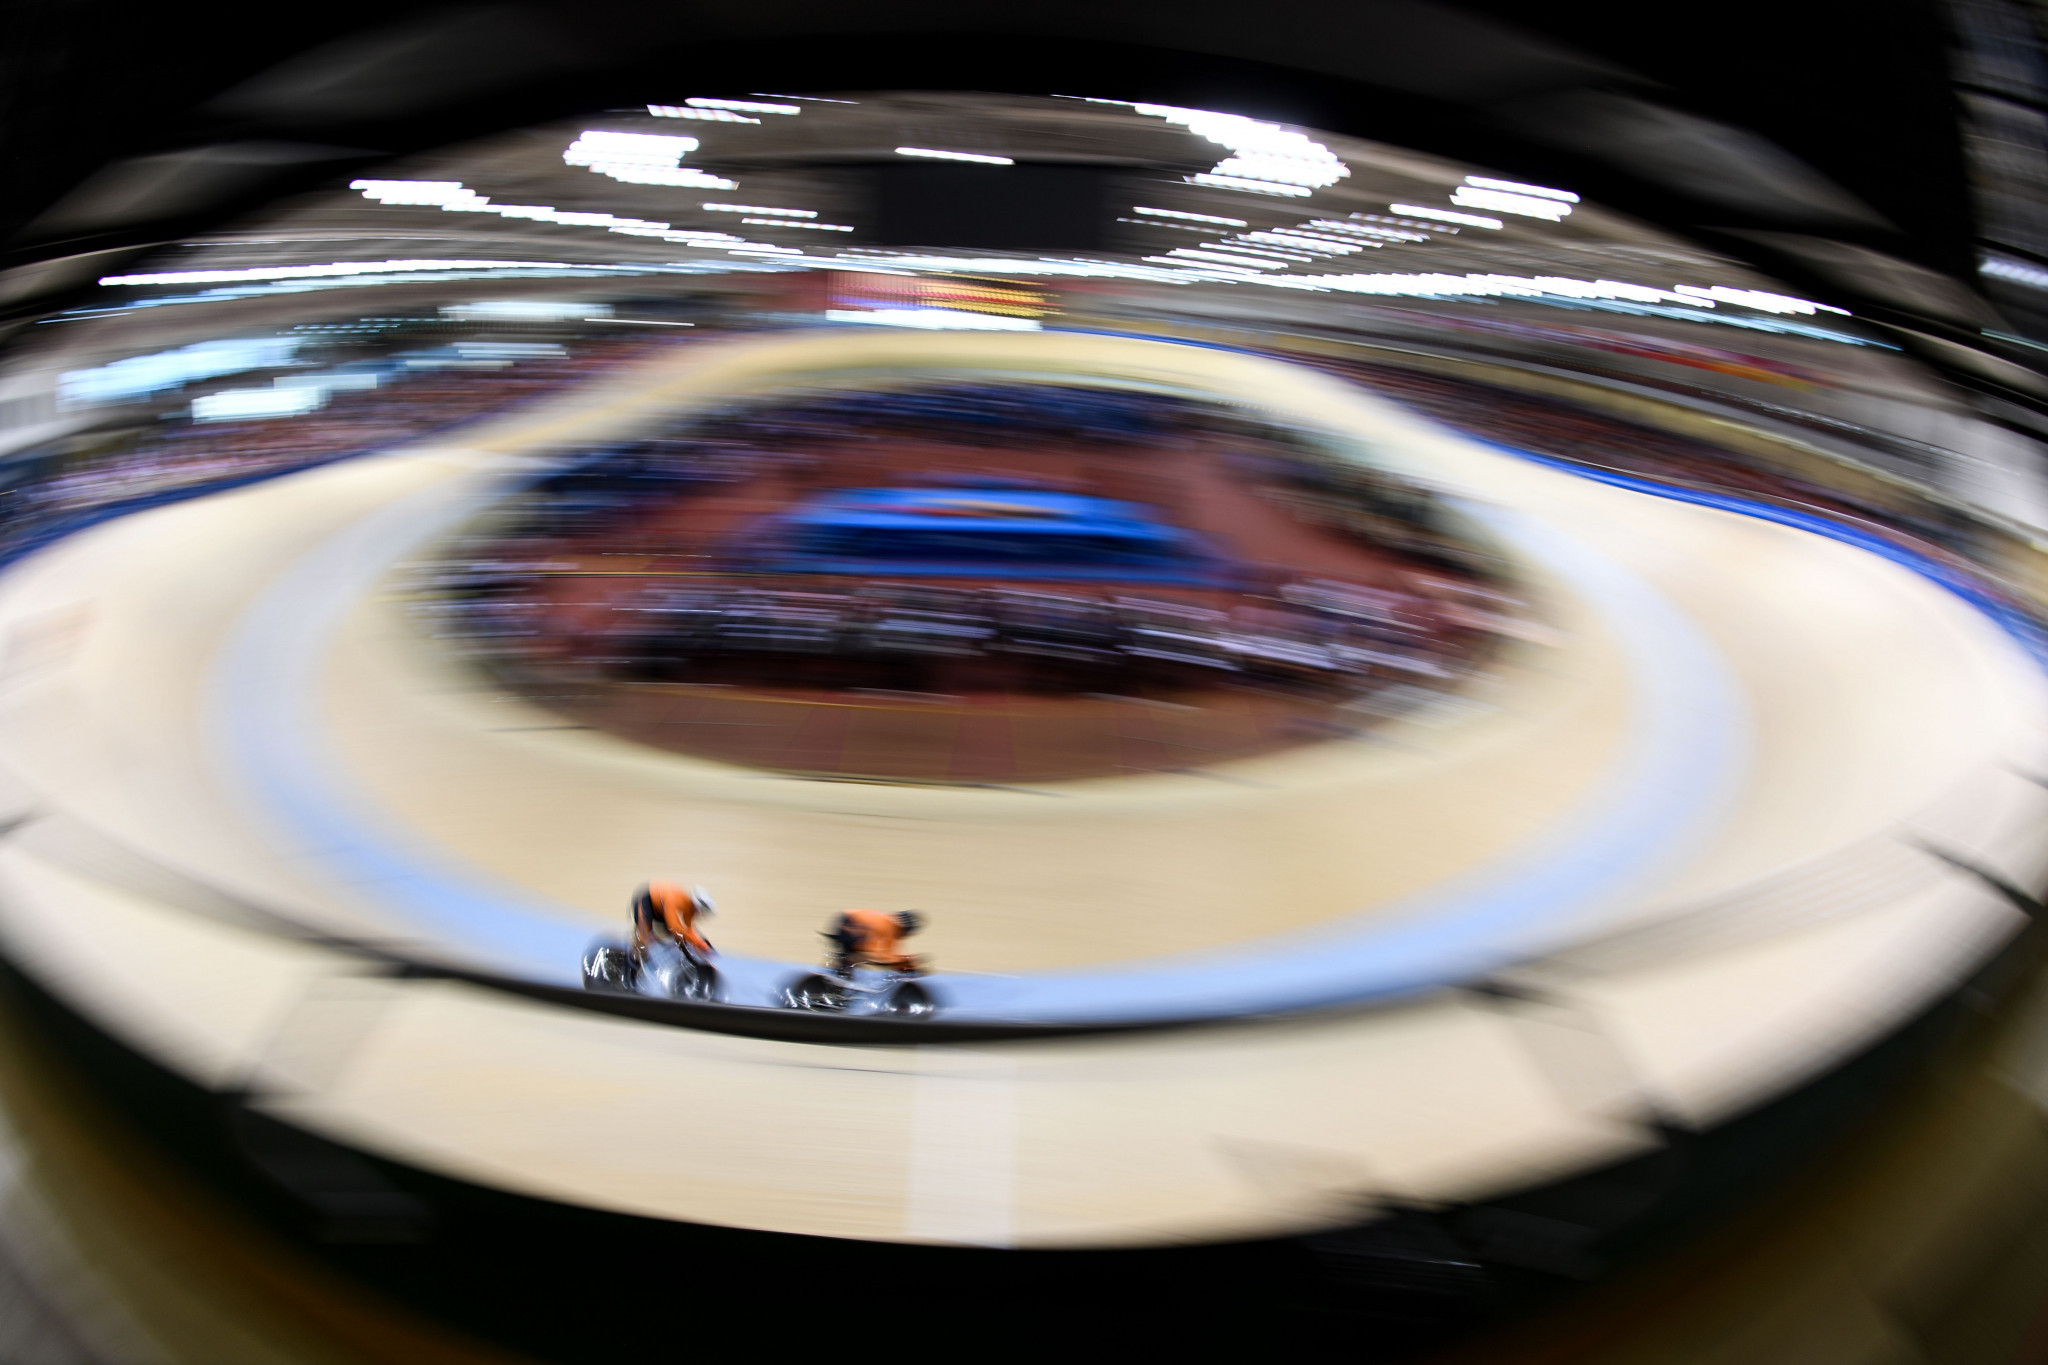 Cycling began at Minsk Velodrome, with medals awarded in the team sprint events ©Minsk 2019